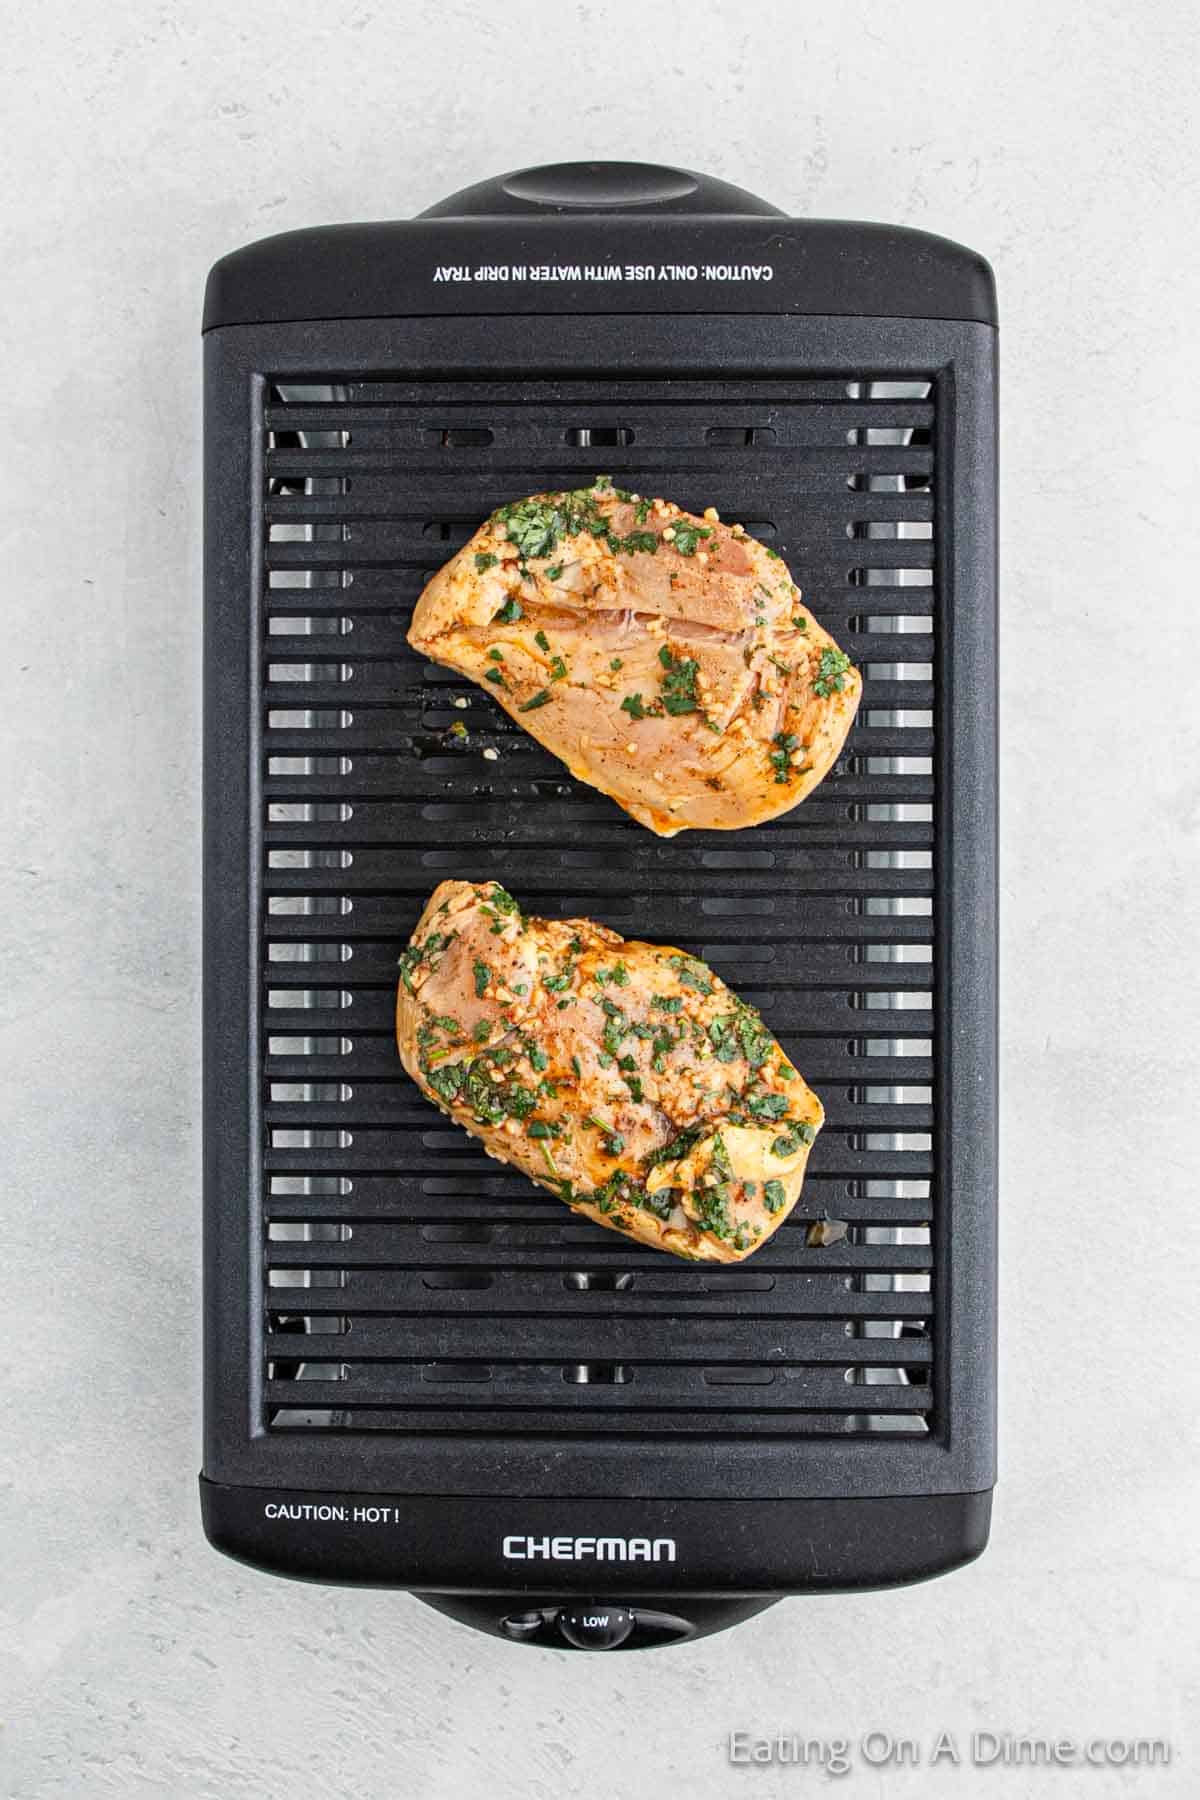 Cooking chicken on an indoor grill